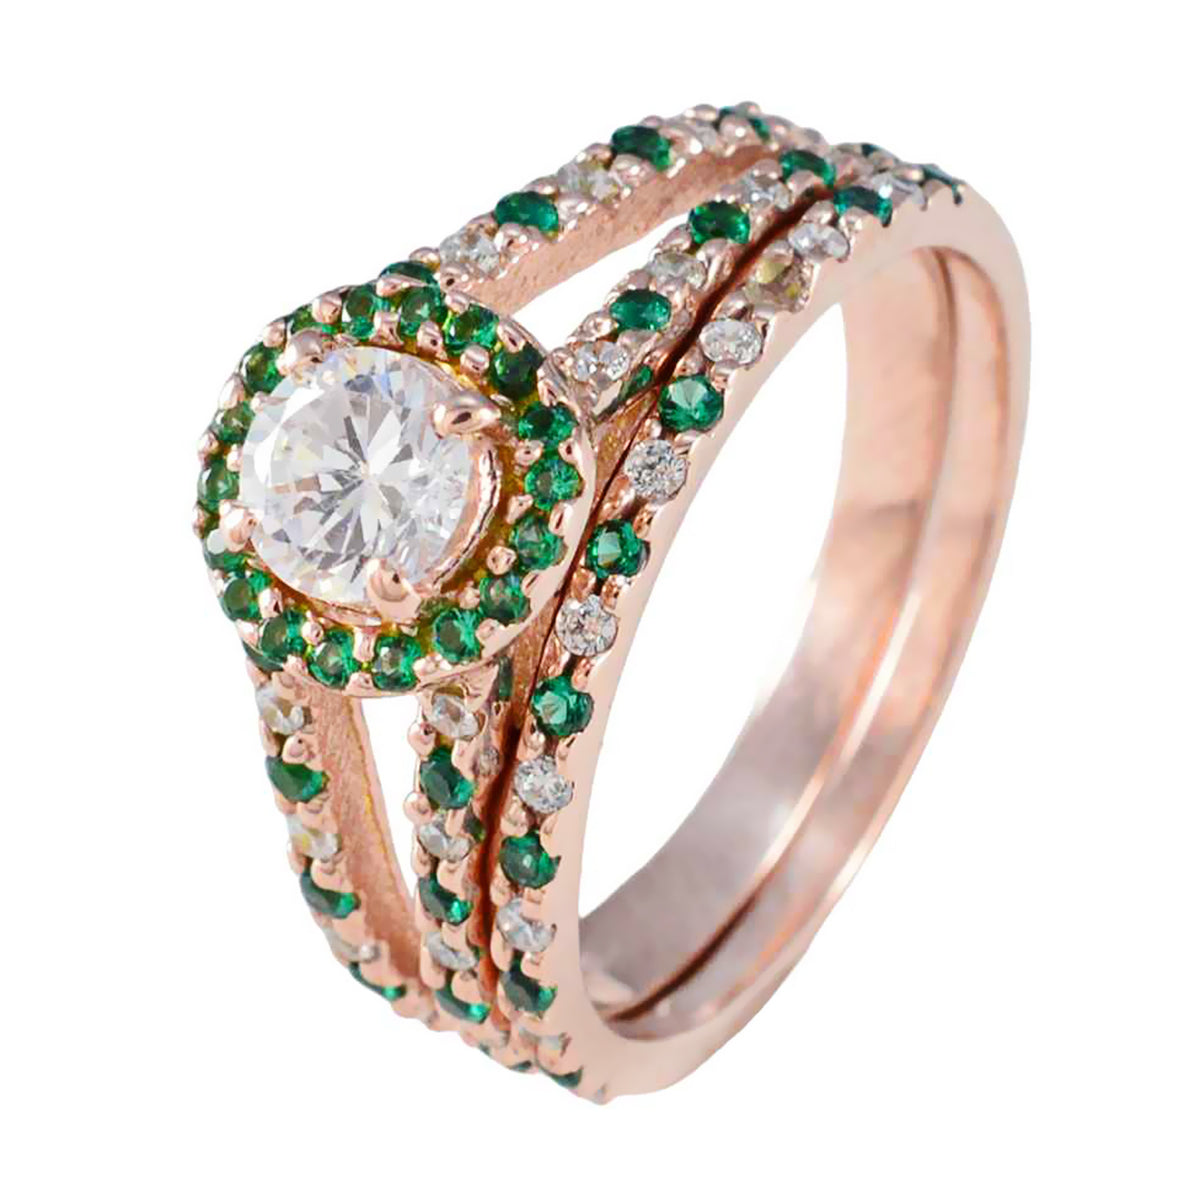 Riyo Extensive Silver Ring With Rose Gold Plating Emerald CZ Stone Round Shape Prong Setting Designer Jewelry Christmas Ring